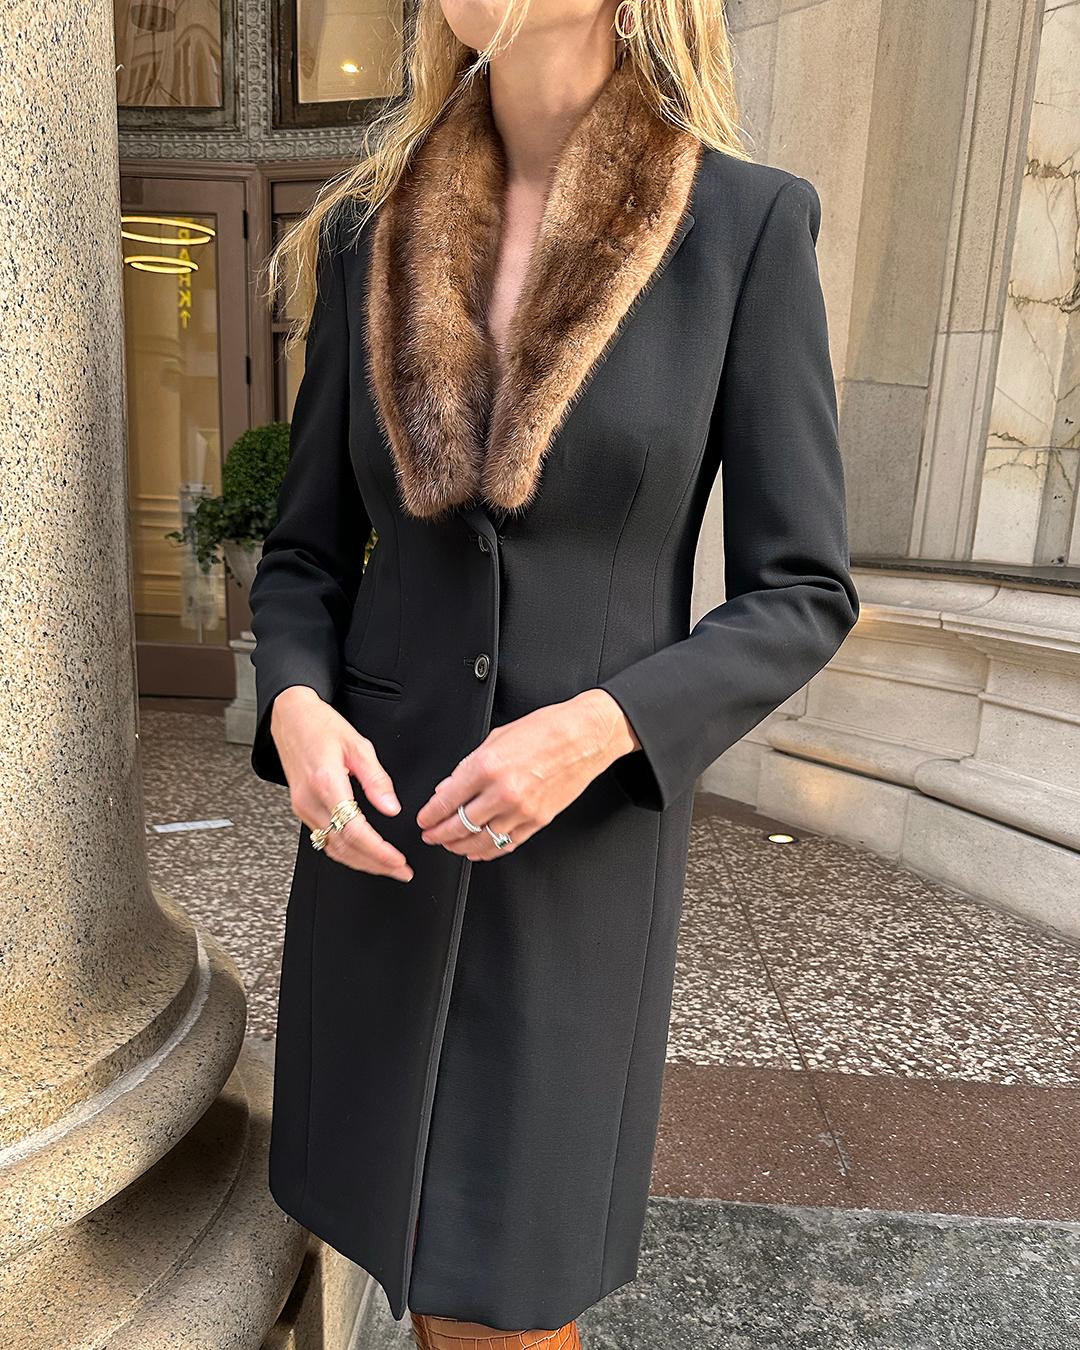 Vintage 1990s Michael Kors Virgin Wool Coat with Mink Trim: I am so excited about this 1990s Michael Kors coat— it's truly one of the most well-made pieces of outwear I've ever put on, and it's the ultimate luxury, crafted in Italy of 100% virgin